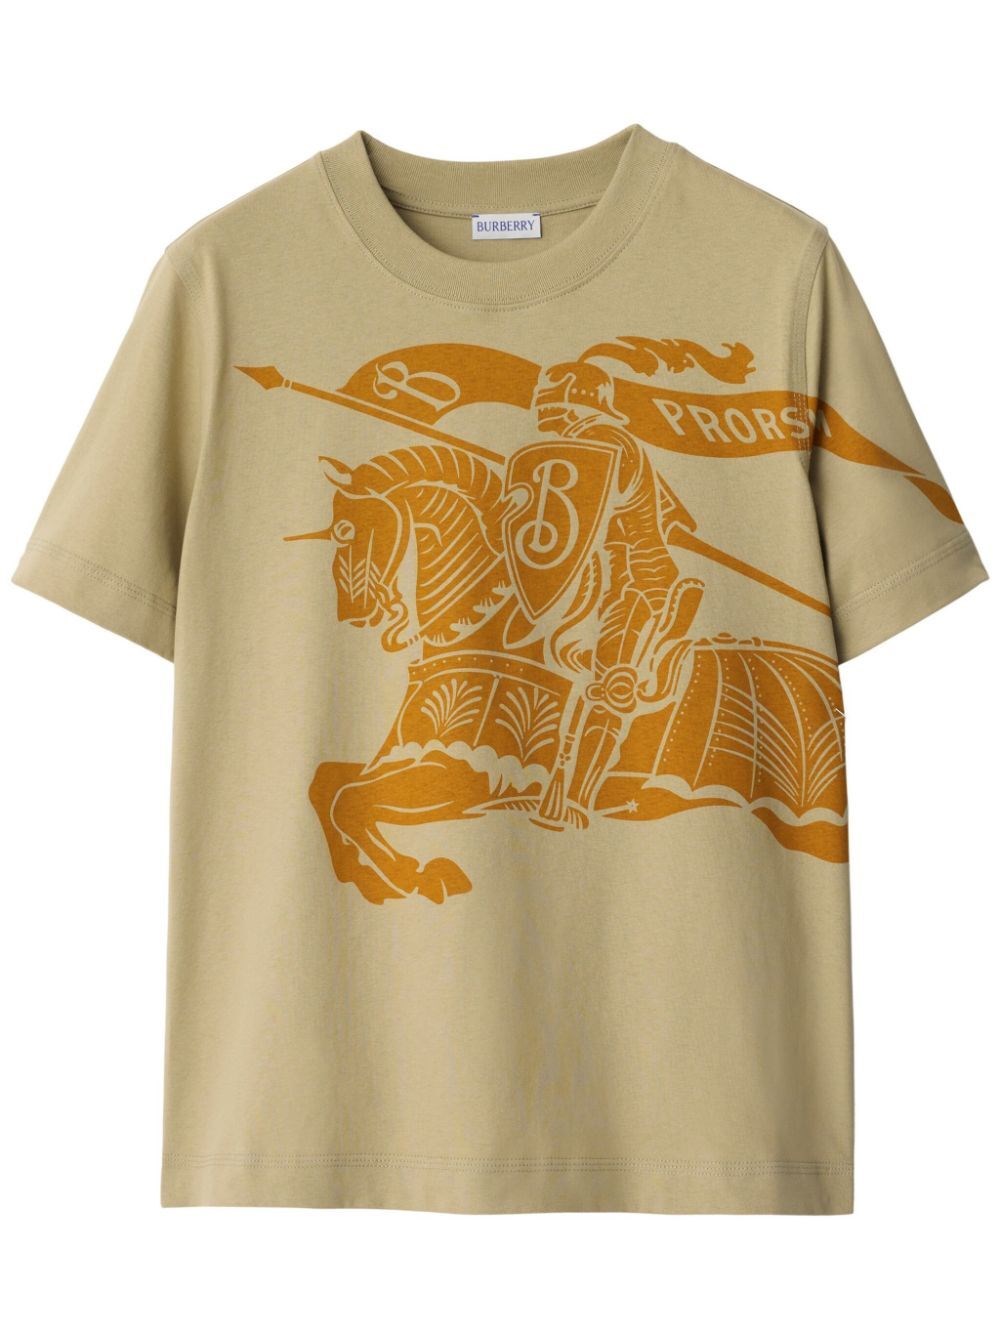 Shop Burberry Ekd Printed T-shirt In Nude & Neutrals